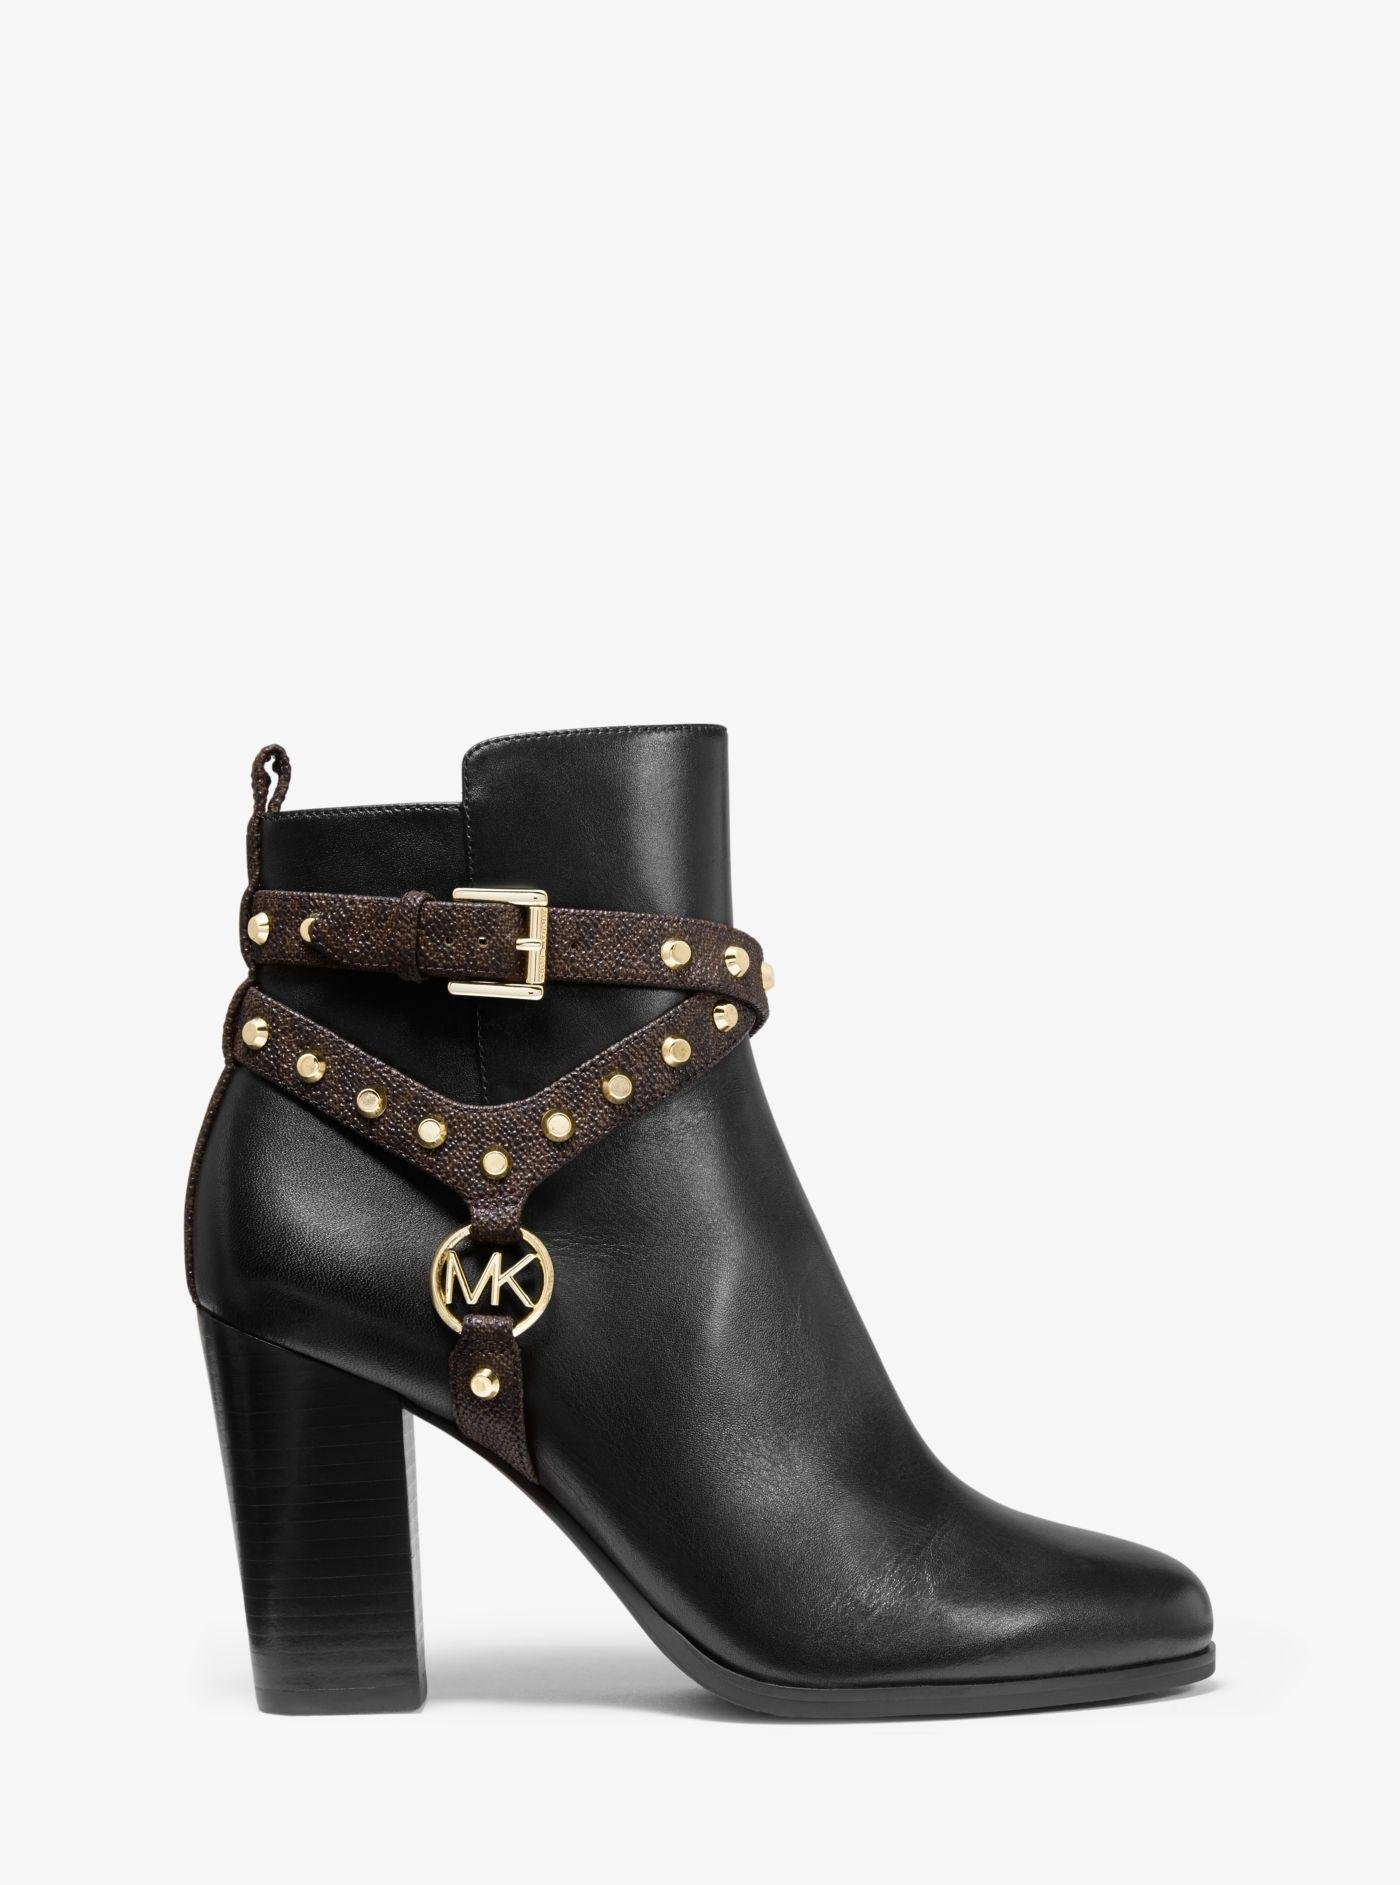 Michael Kors Preston Studded Leather Ankle Boot in Black | Lyst